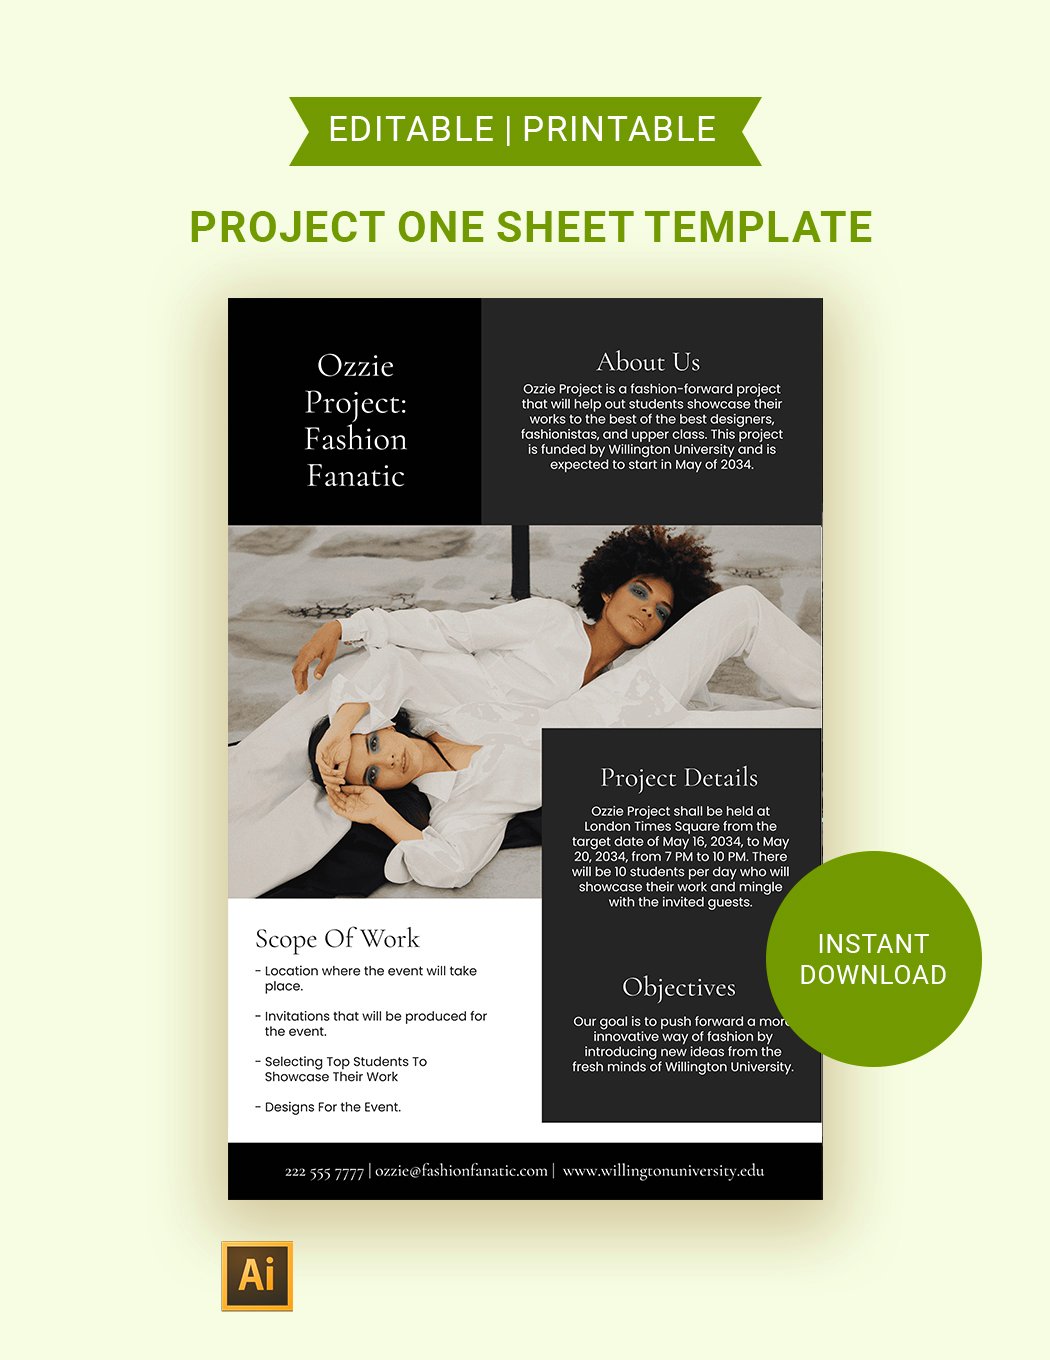 Project One Sheet Template